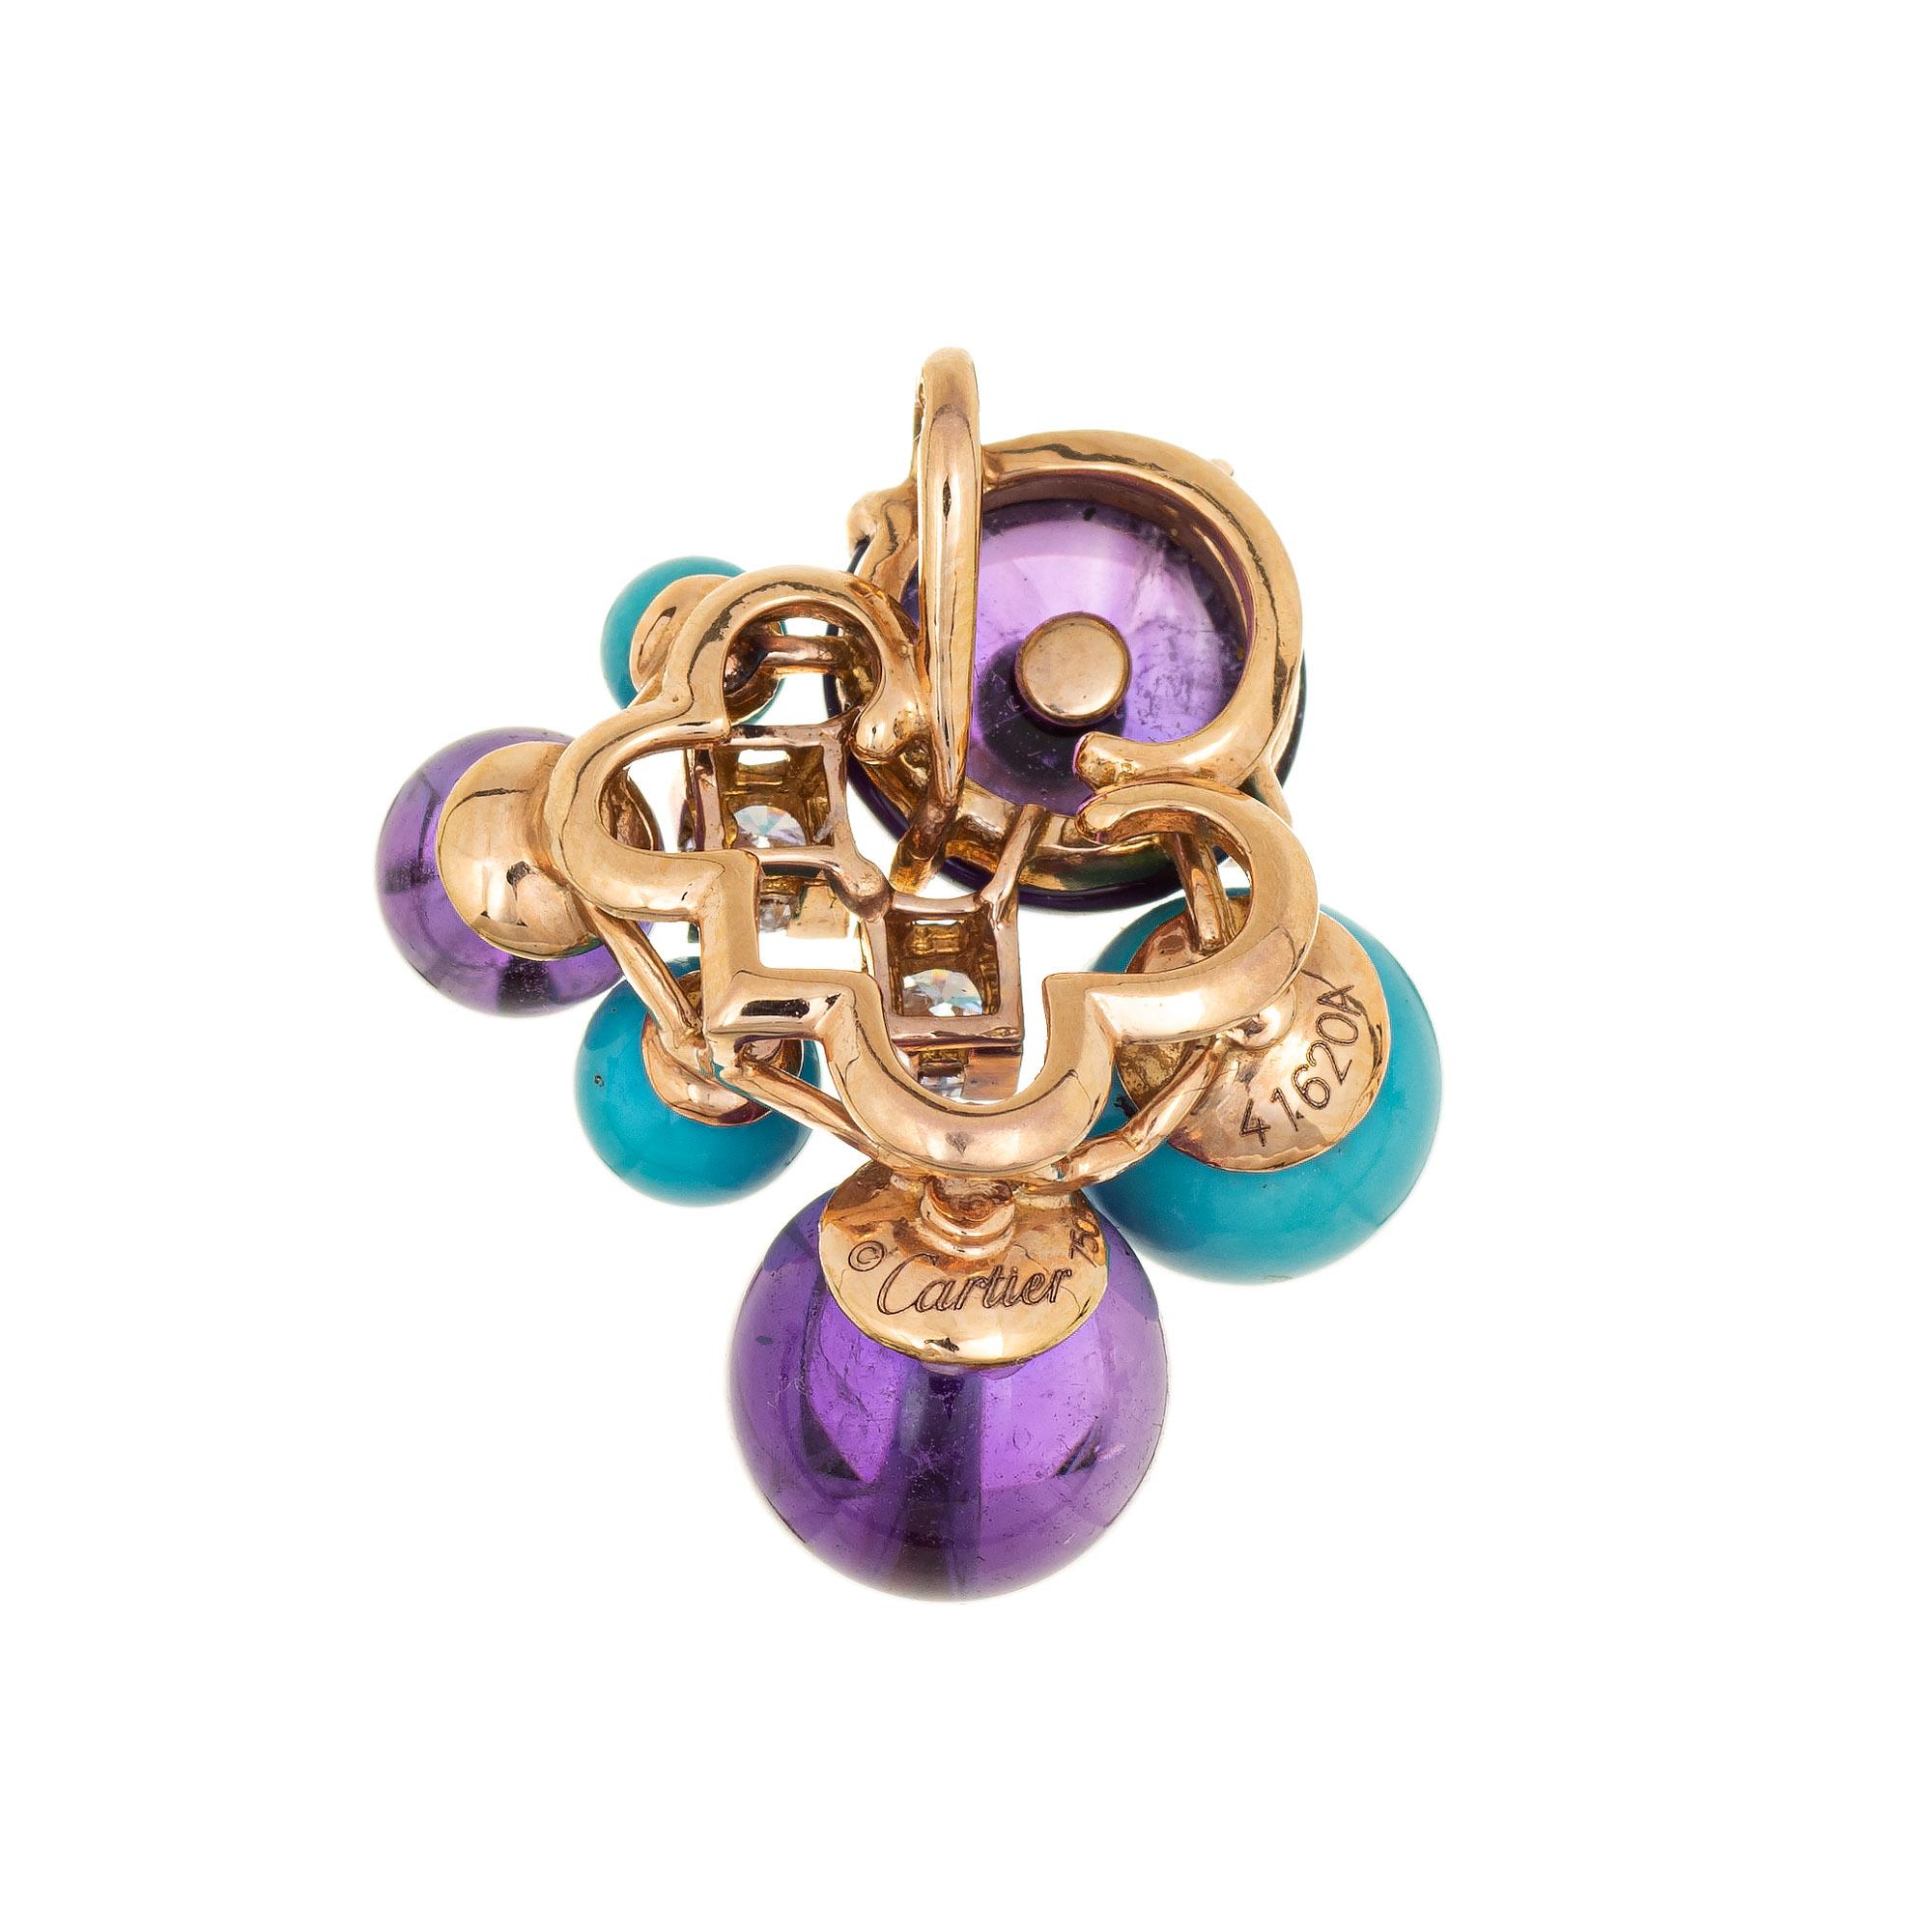 Stylish pre-owned Cartier 'Les Delices De Goa' turquoise & amethyst pendant crafted in 18k yellow gold.  

The pendant is set with amethyst and turquoise in various sizes ranging from 5mm to 10mm. Five diamonds total an estimated 0.45 carats